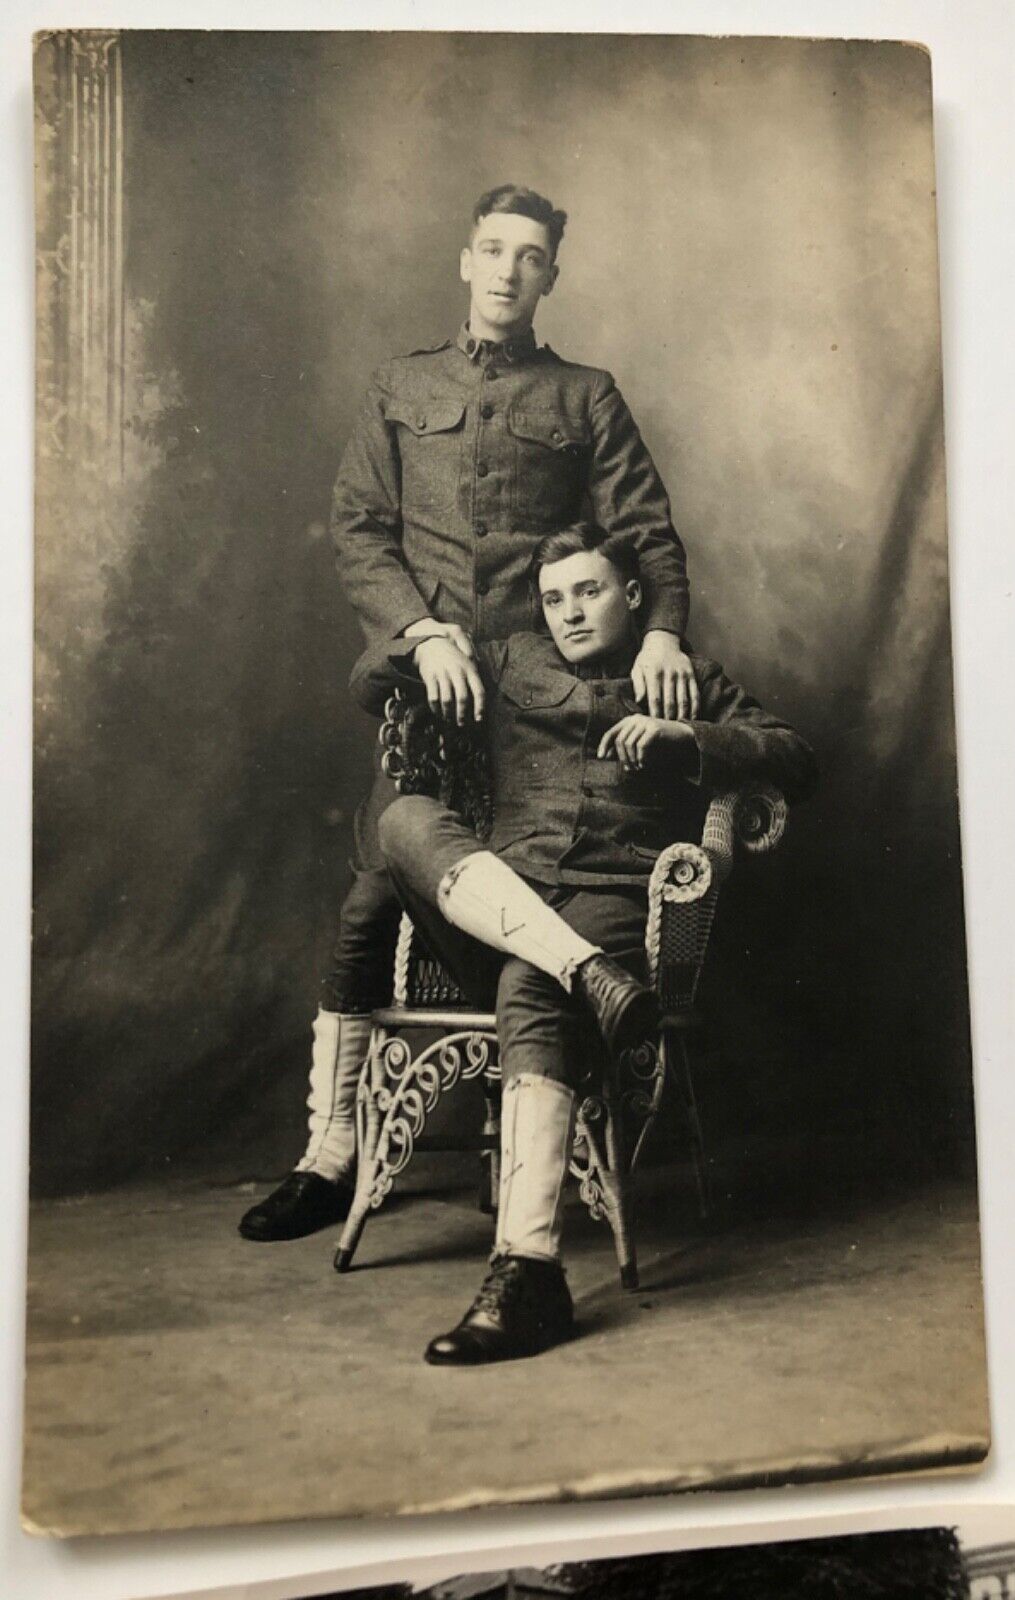 Antique RPPC Photograph WW1 Military Men Gay Int Affection